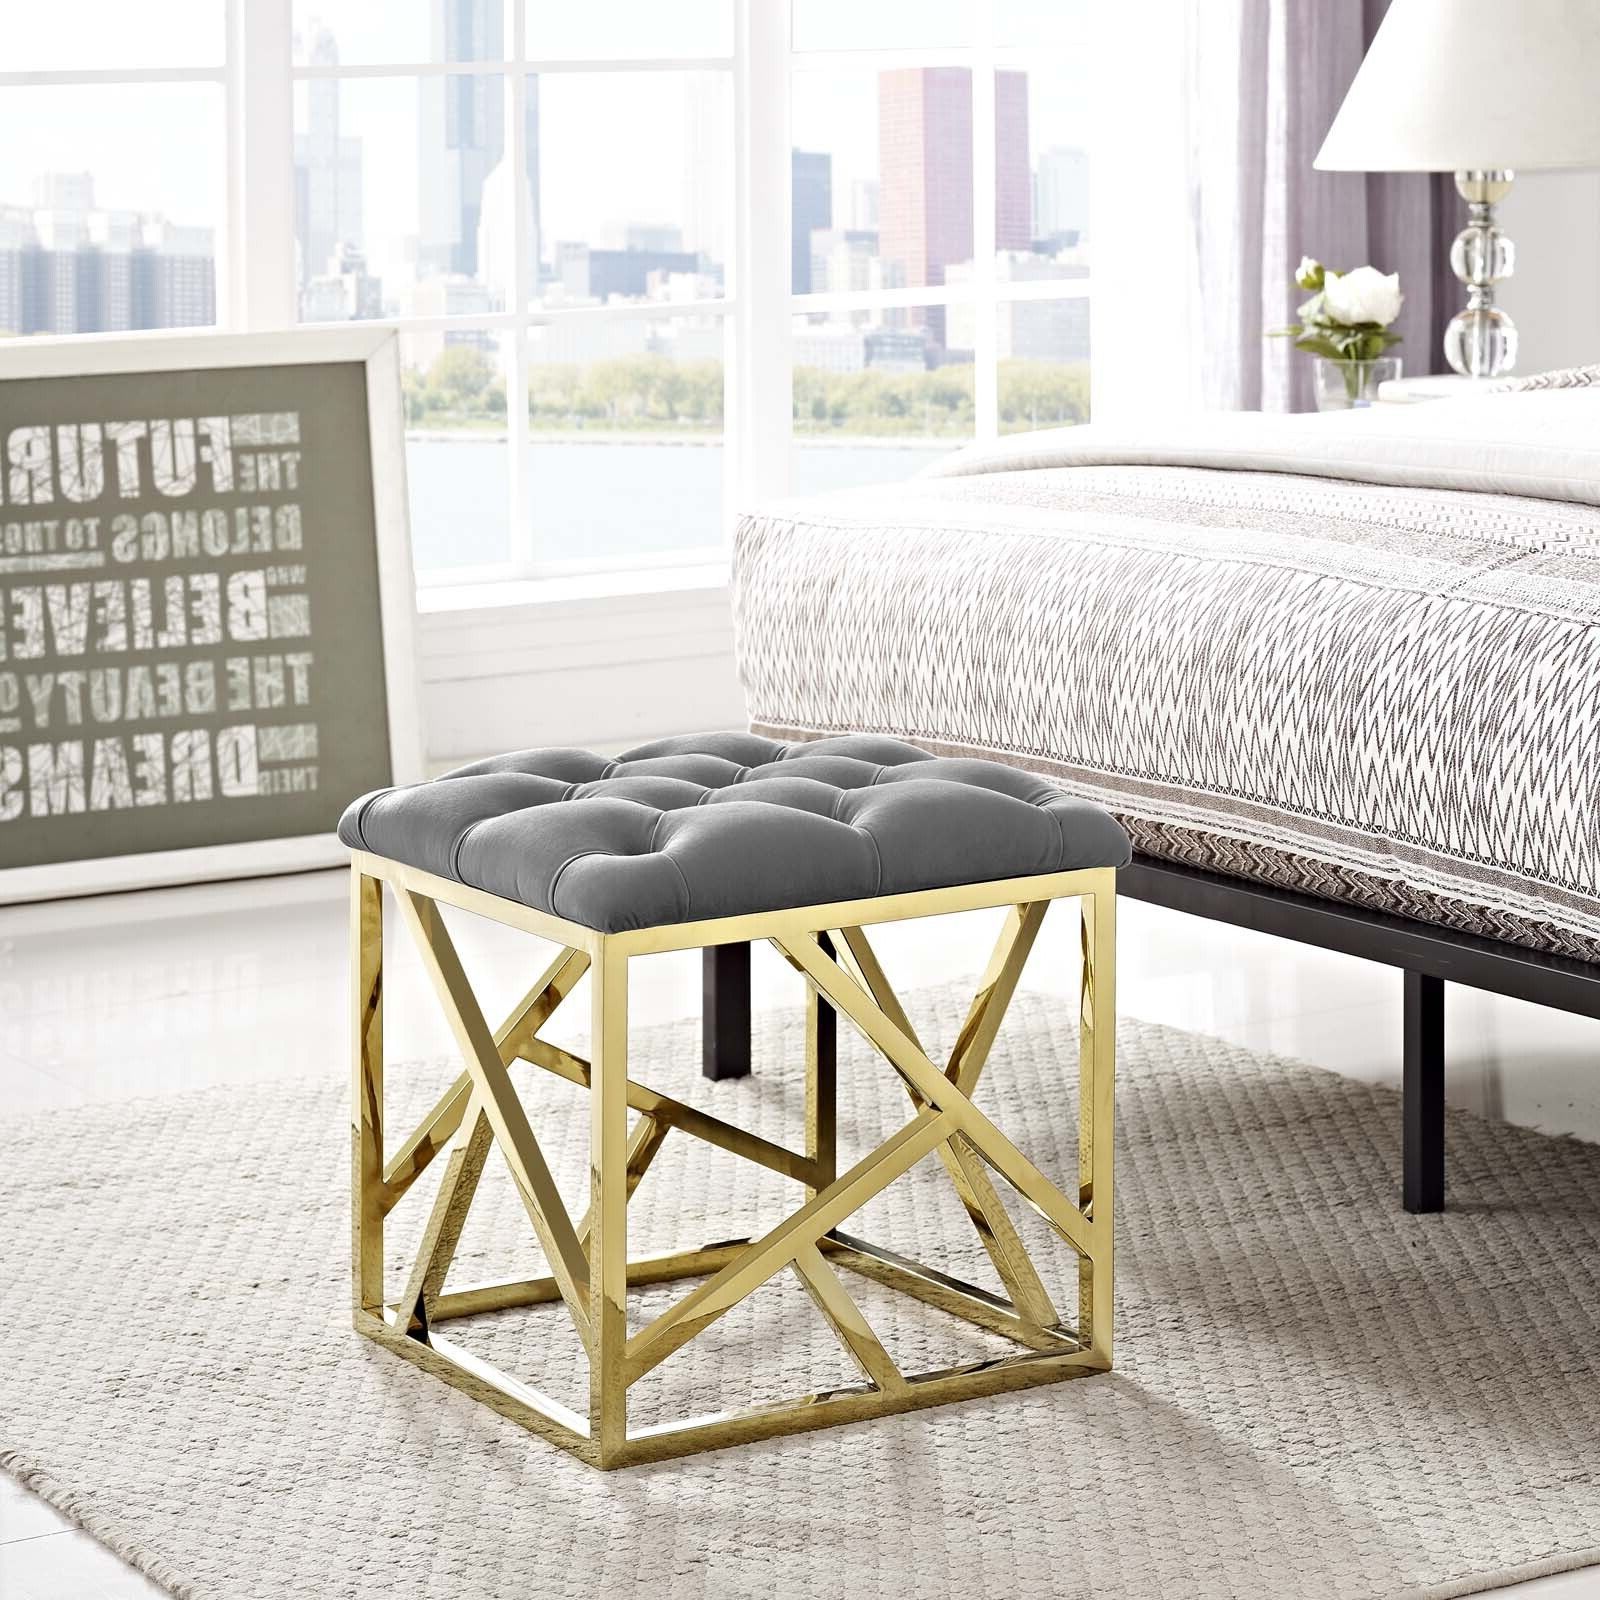 2019 Geometric Gray Ottomans Within Contemporary Modern Tufted Velvet Geometric Metal Ottoman Bench In Gold Gray (View 11 of 15)